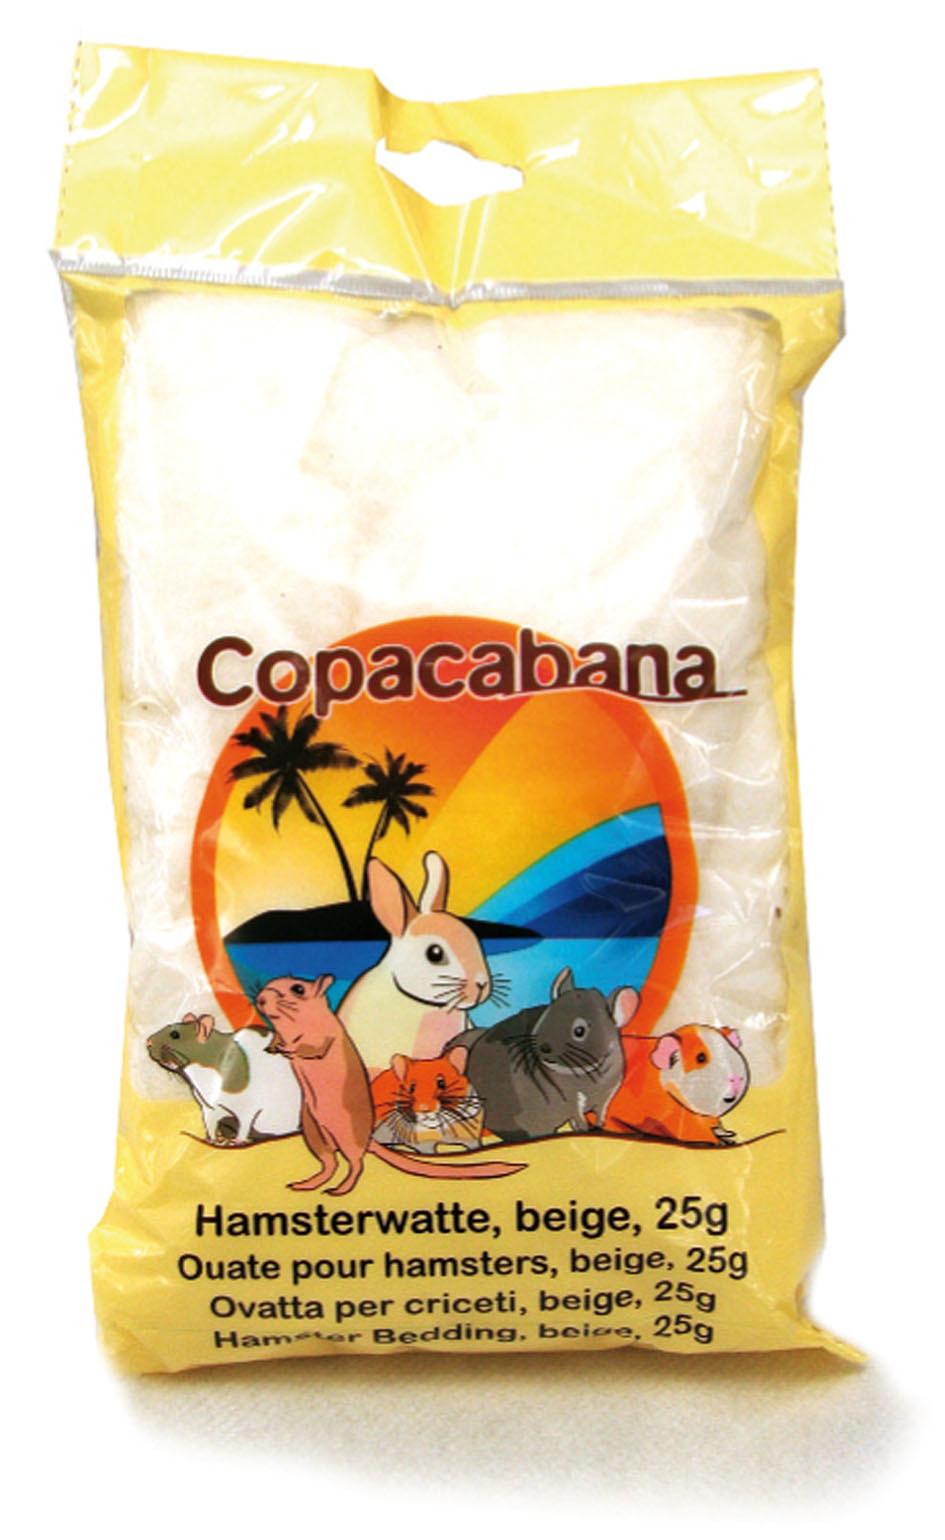 Ouate pour hamsters Copacabana